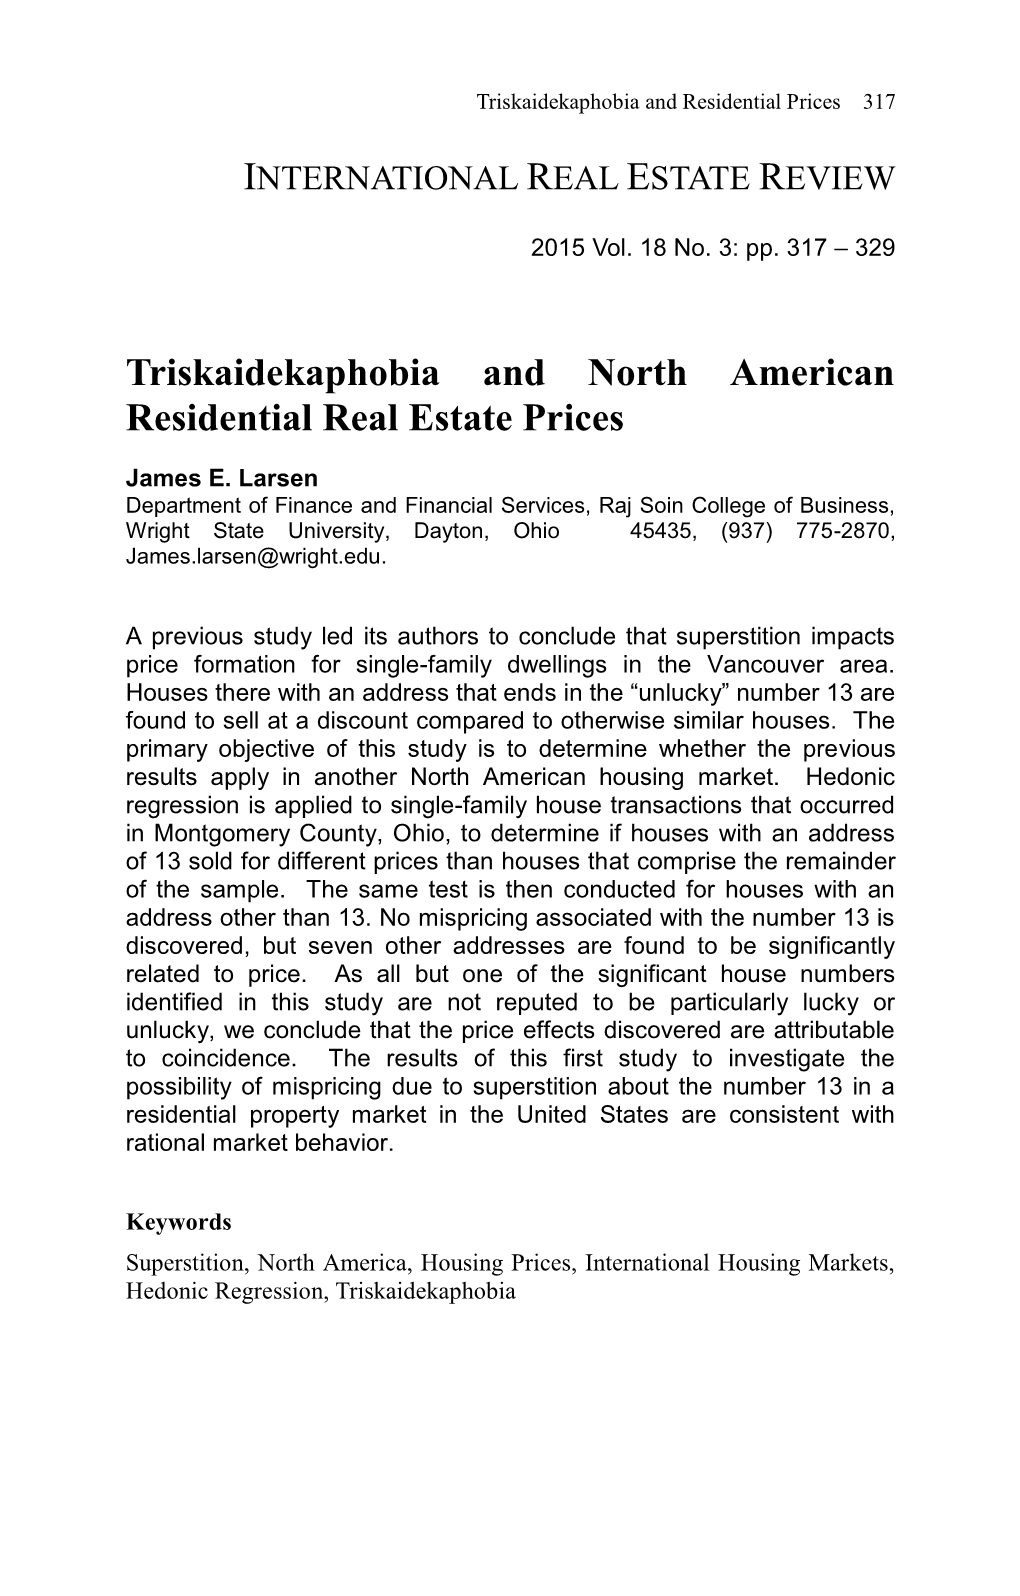 Triskaidekaphobia and North American Residential Real Estate Prices